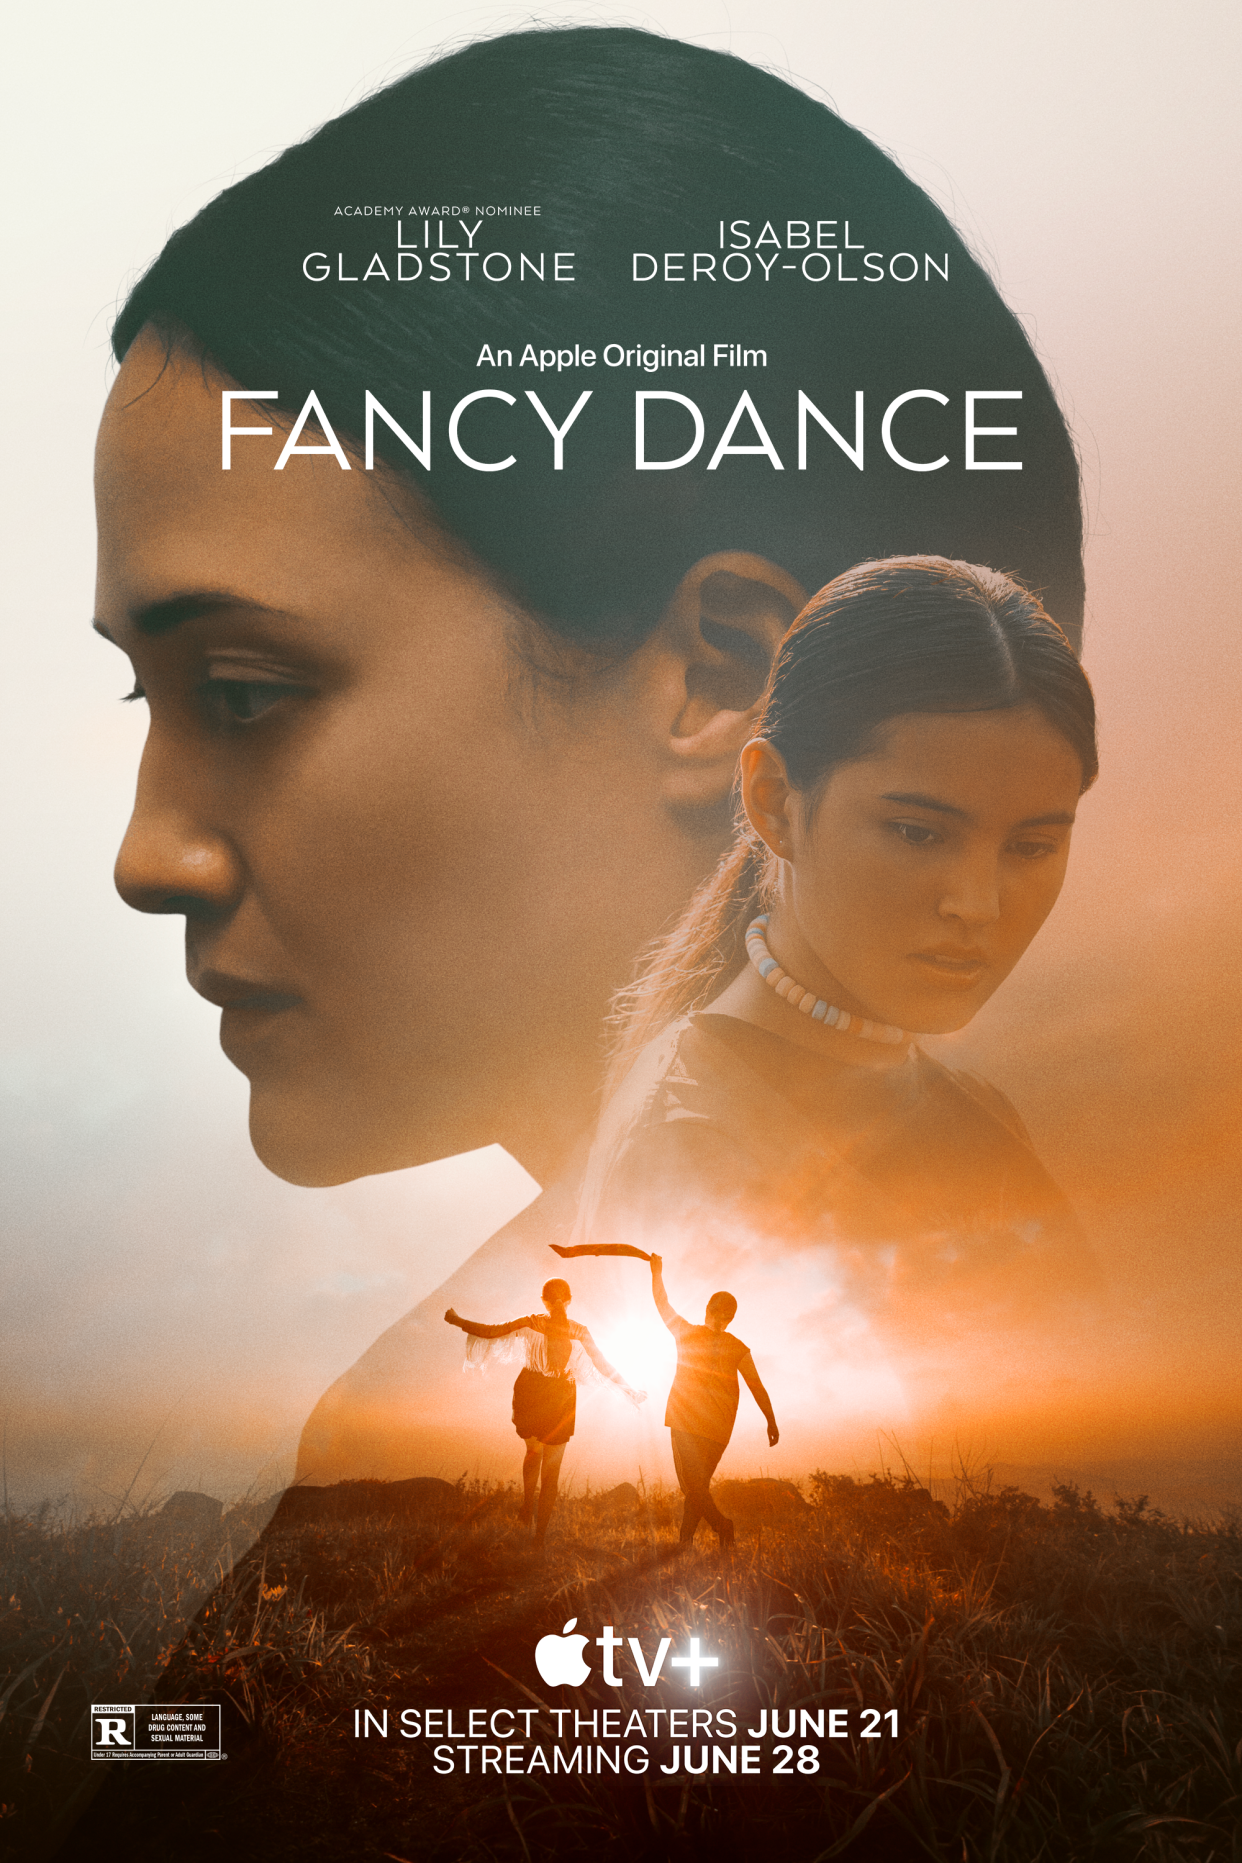 Lily Gladstone, left, and Isabel Deroy-Olson are featured in the poster for the Oklahoma-made movie "Fancy Dance."